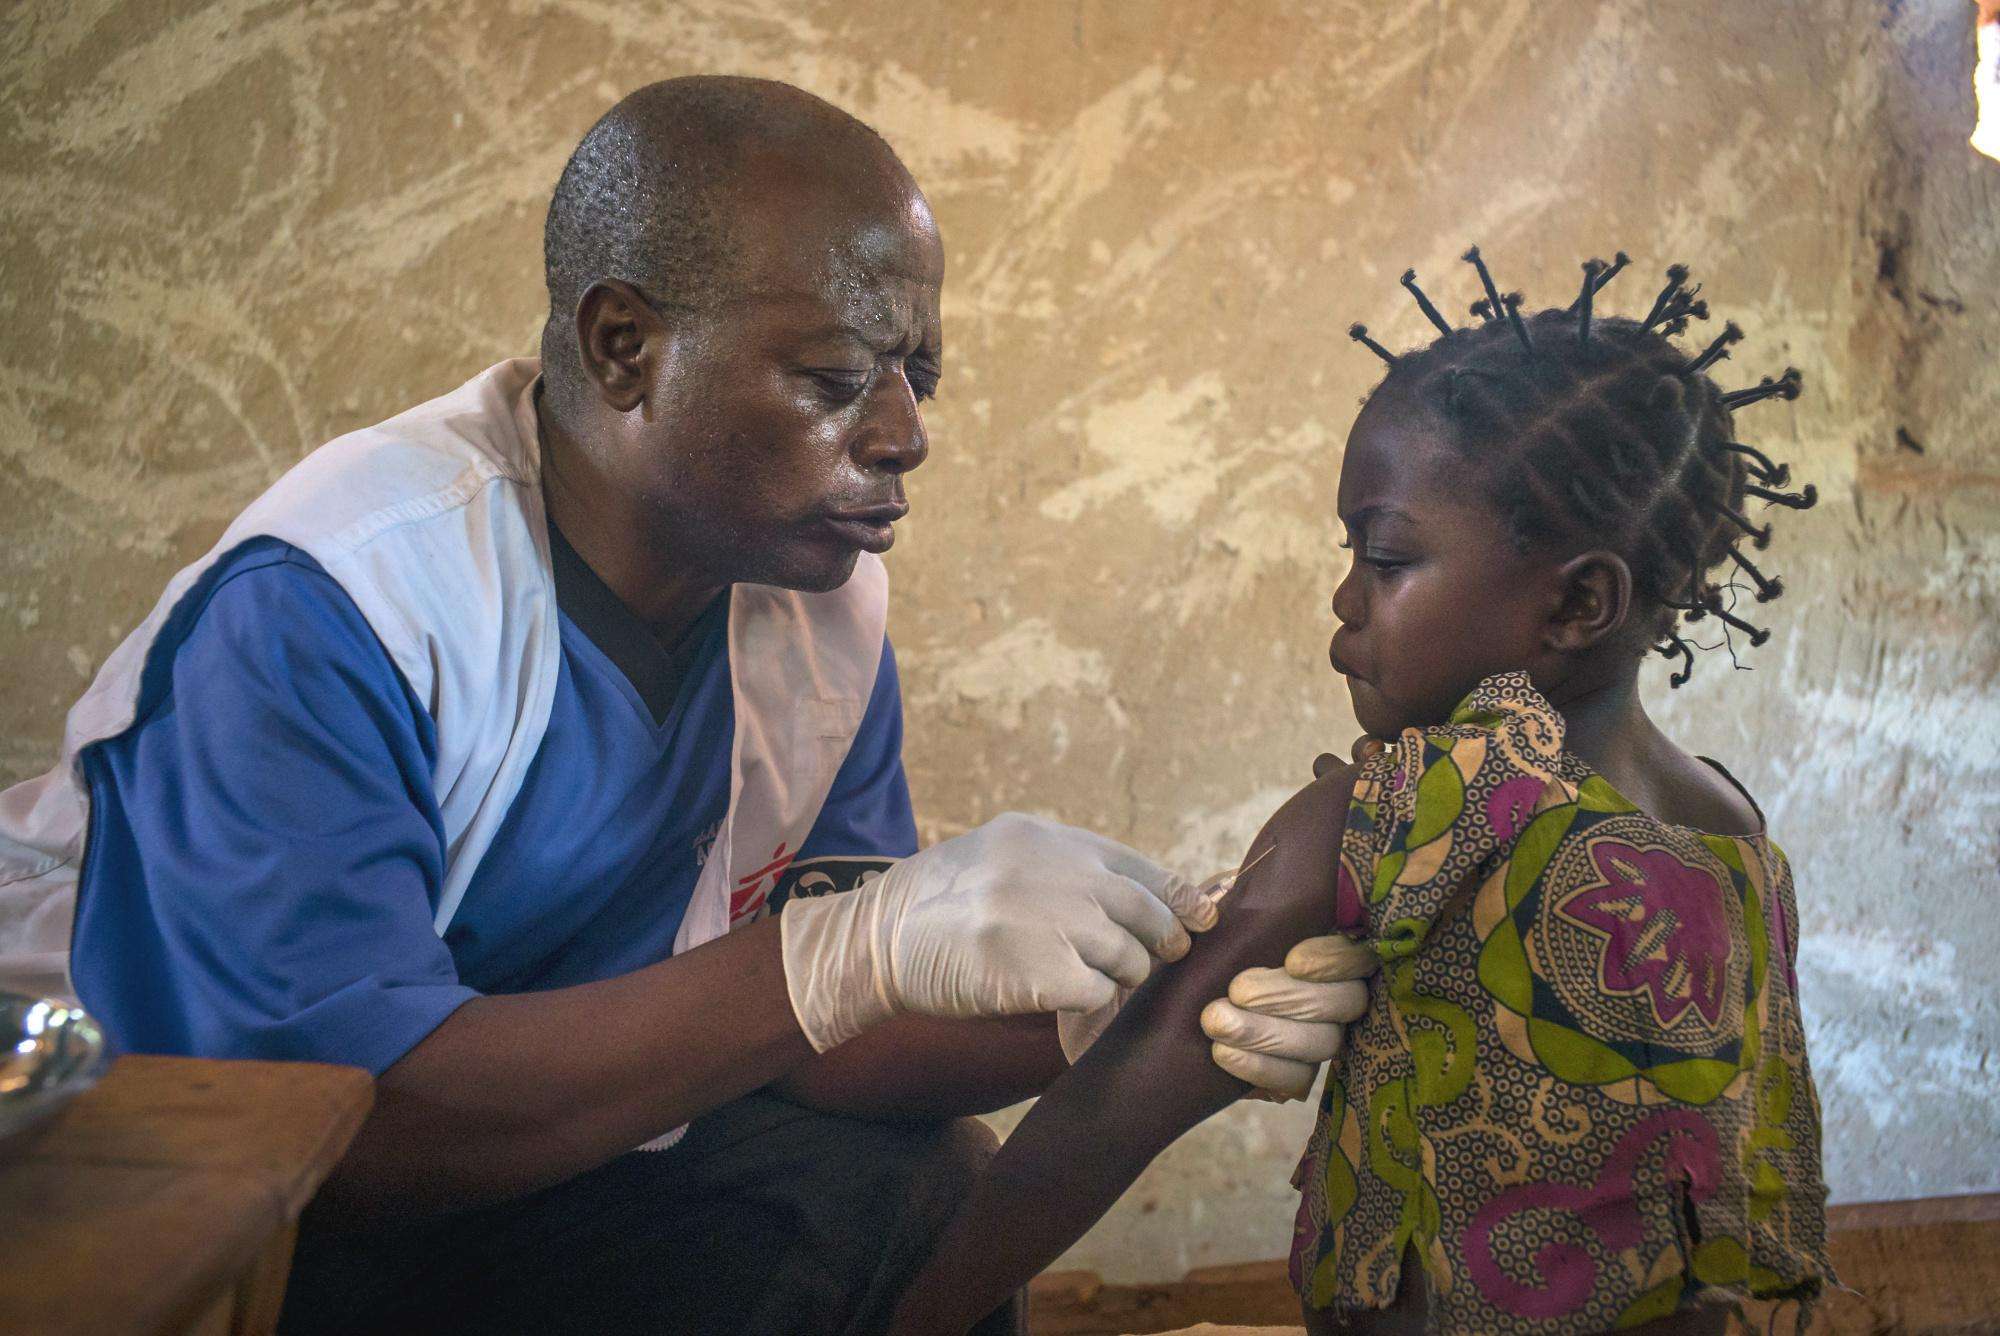 MSF staff member gives a measles vaccination to a young girl